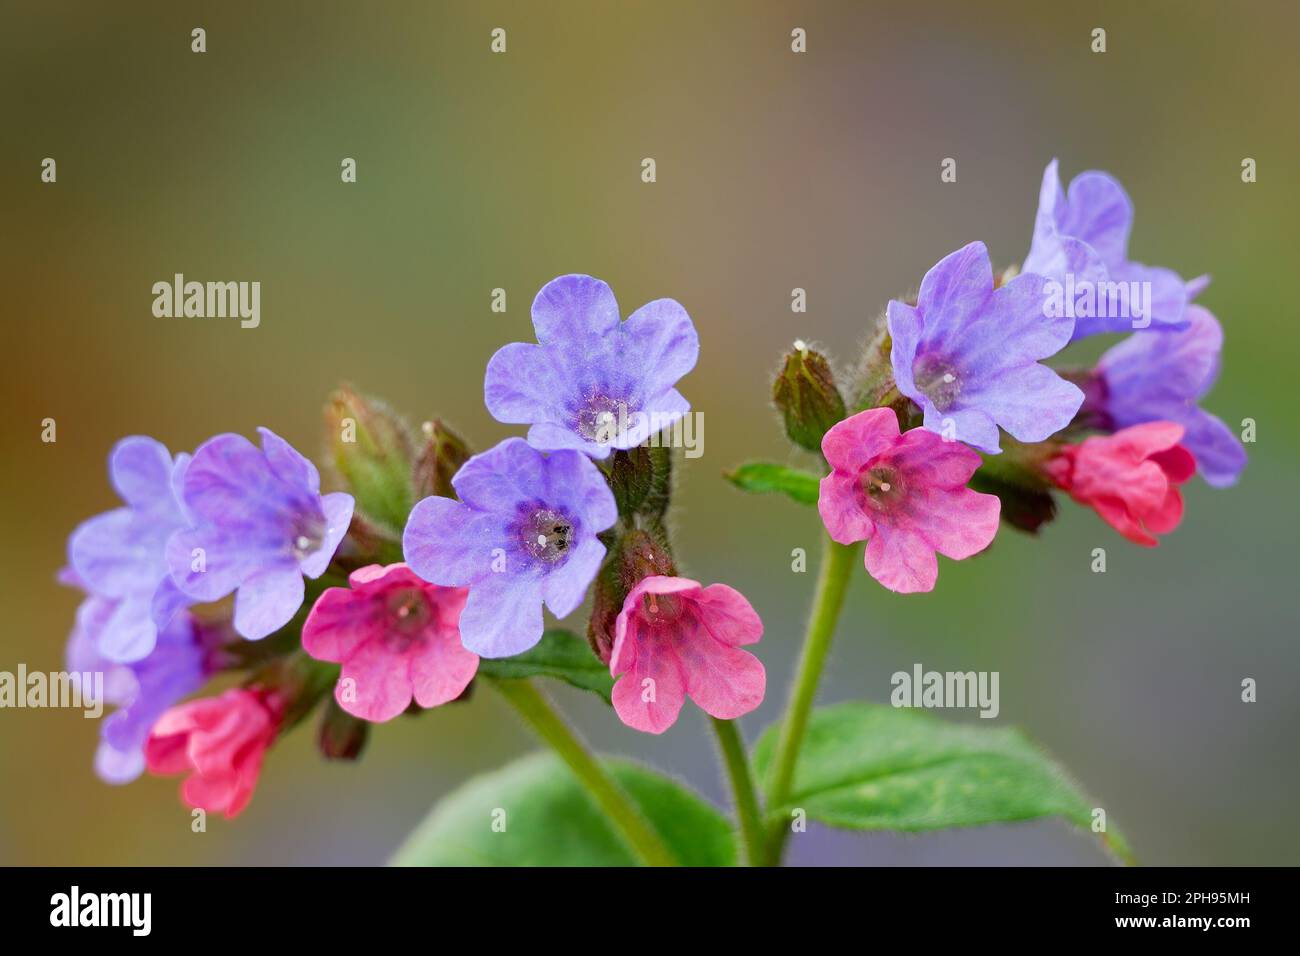 Common lungwort, Pulmonaria officinalis flowers, closeup. Medicinal plant, herb. Blurred background, copy space. Beckov, Slovakia Stock Photo